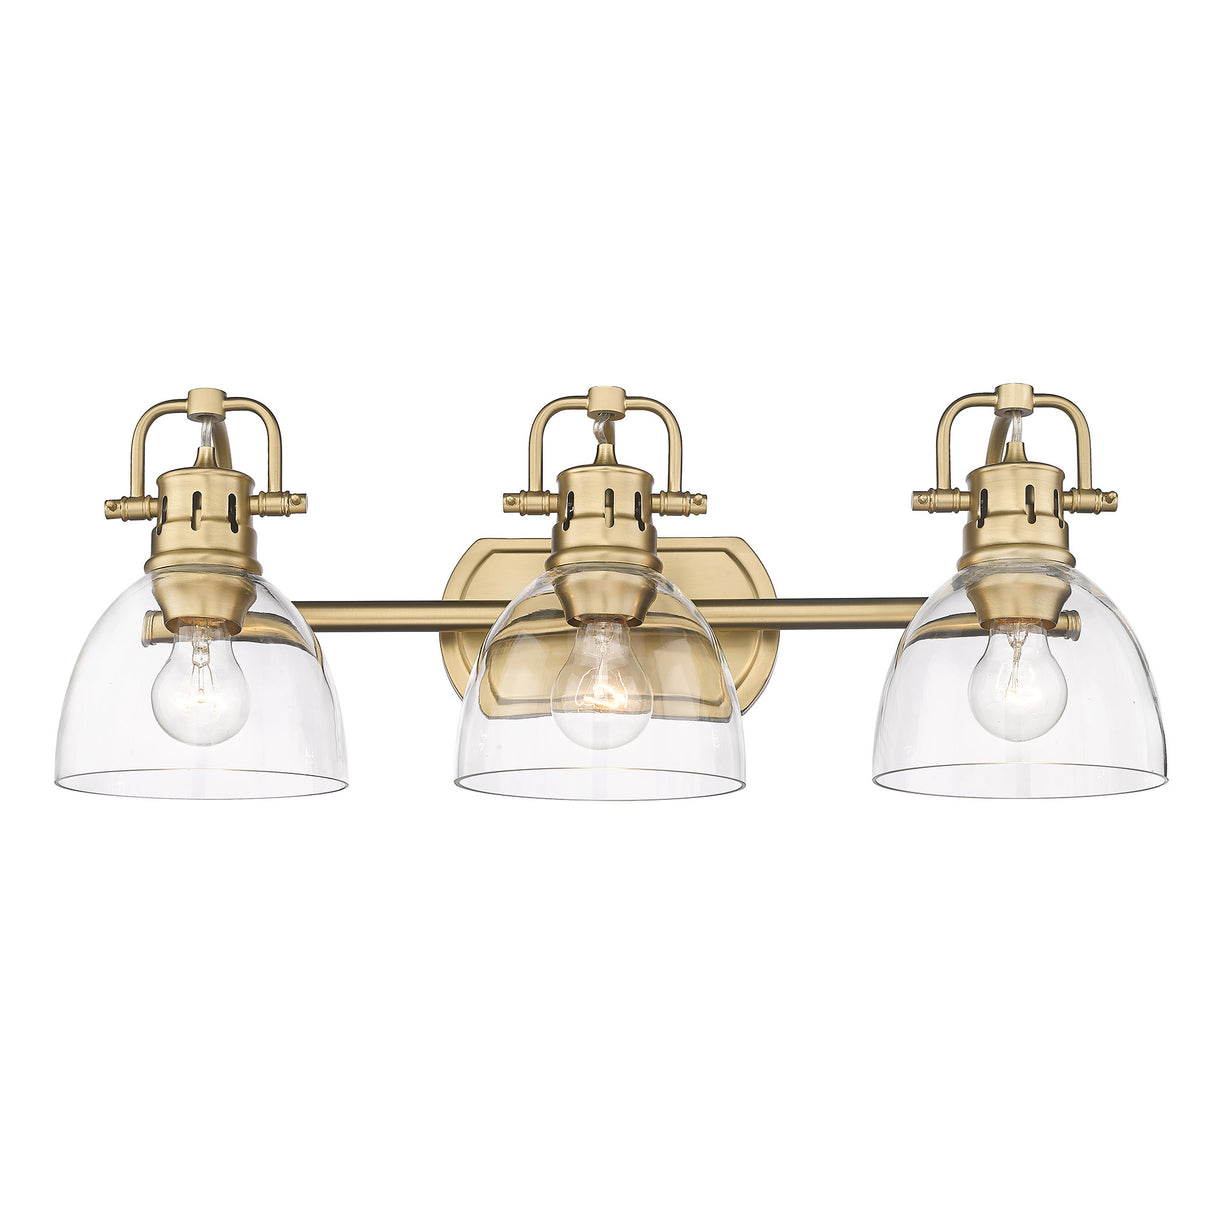 Duncan BCB 3 Light Bath Vanity in Brushed Champagne Bronze with Clear Glass Shade